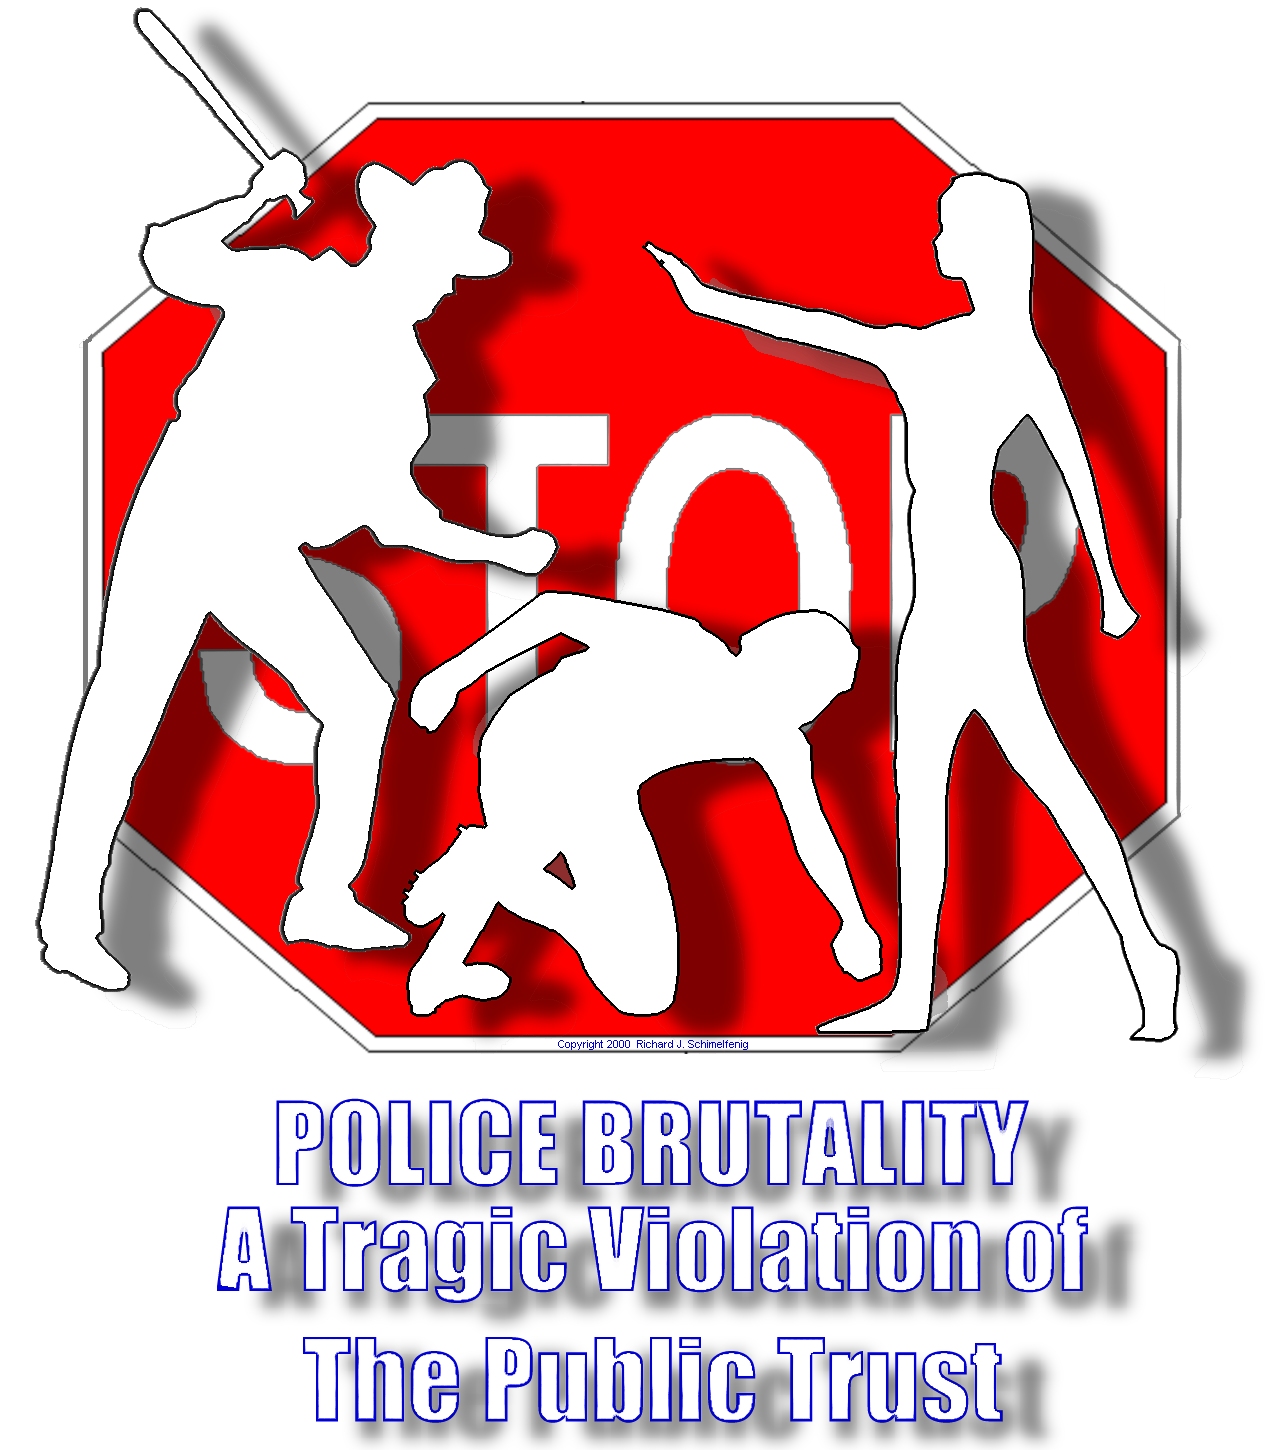 Prohibition Feeds Police Brutality